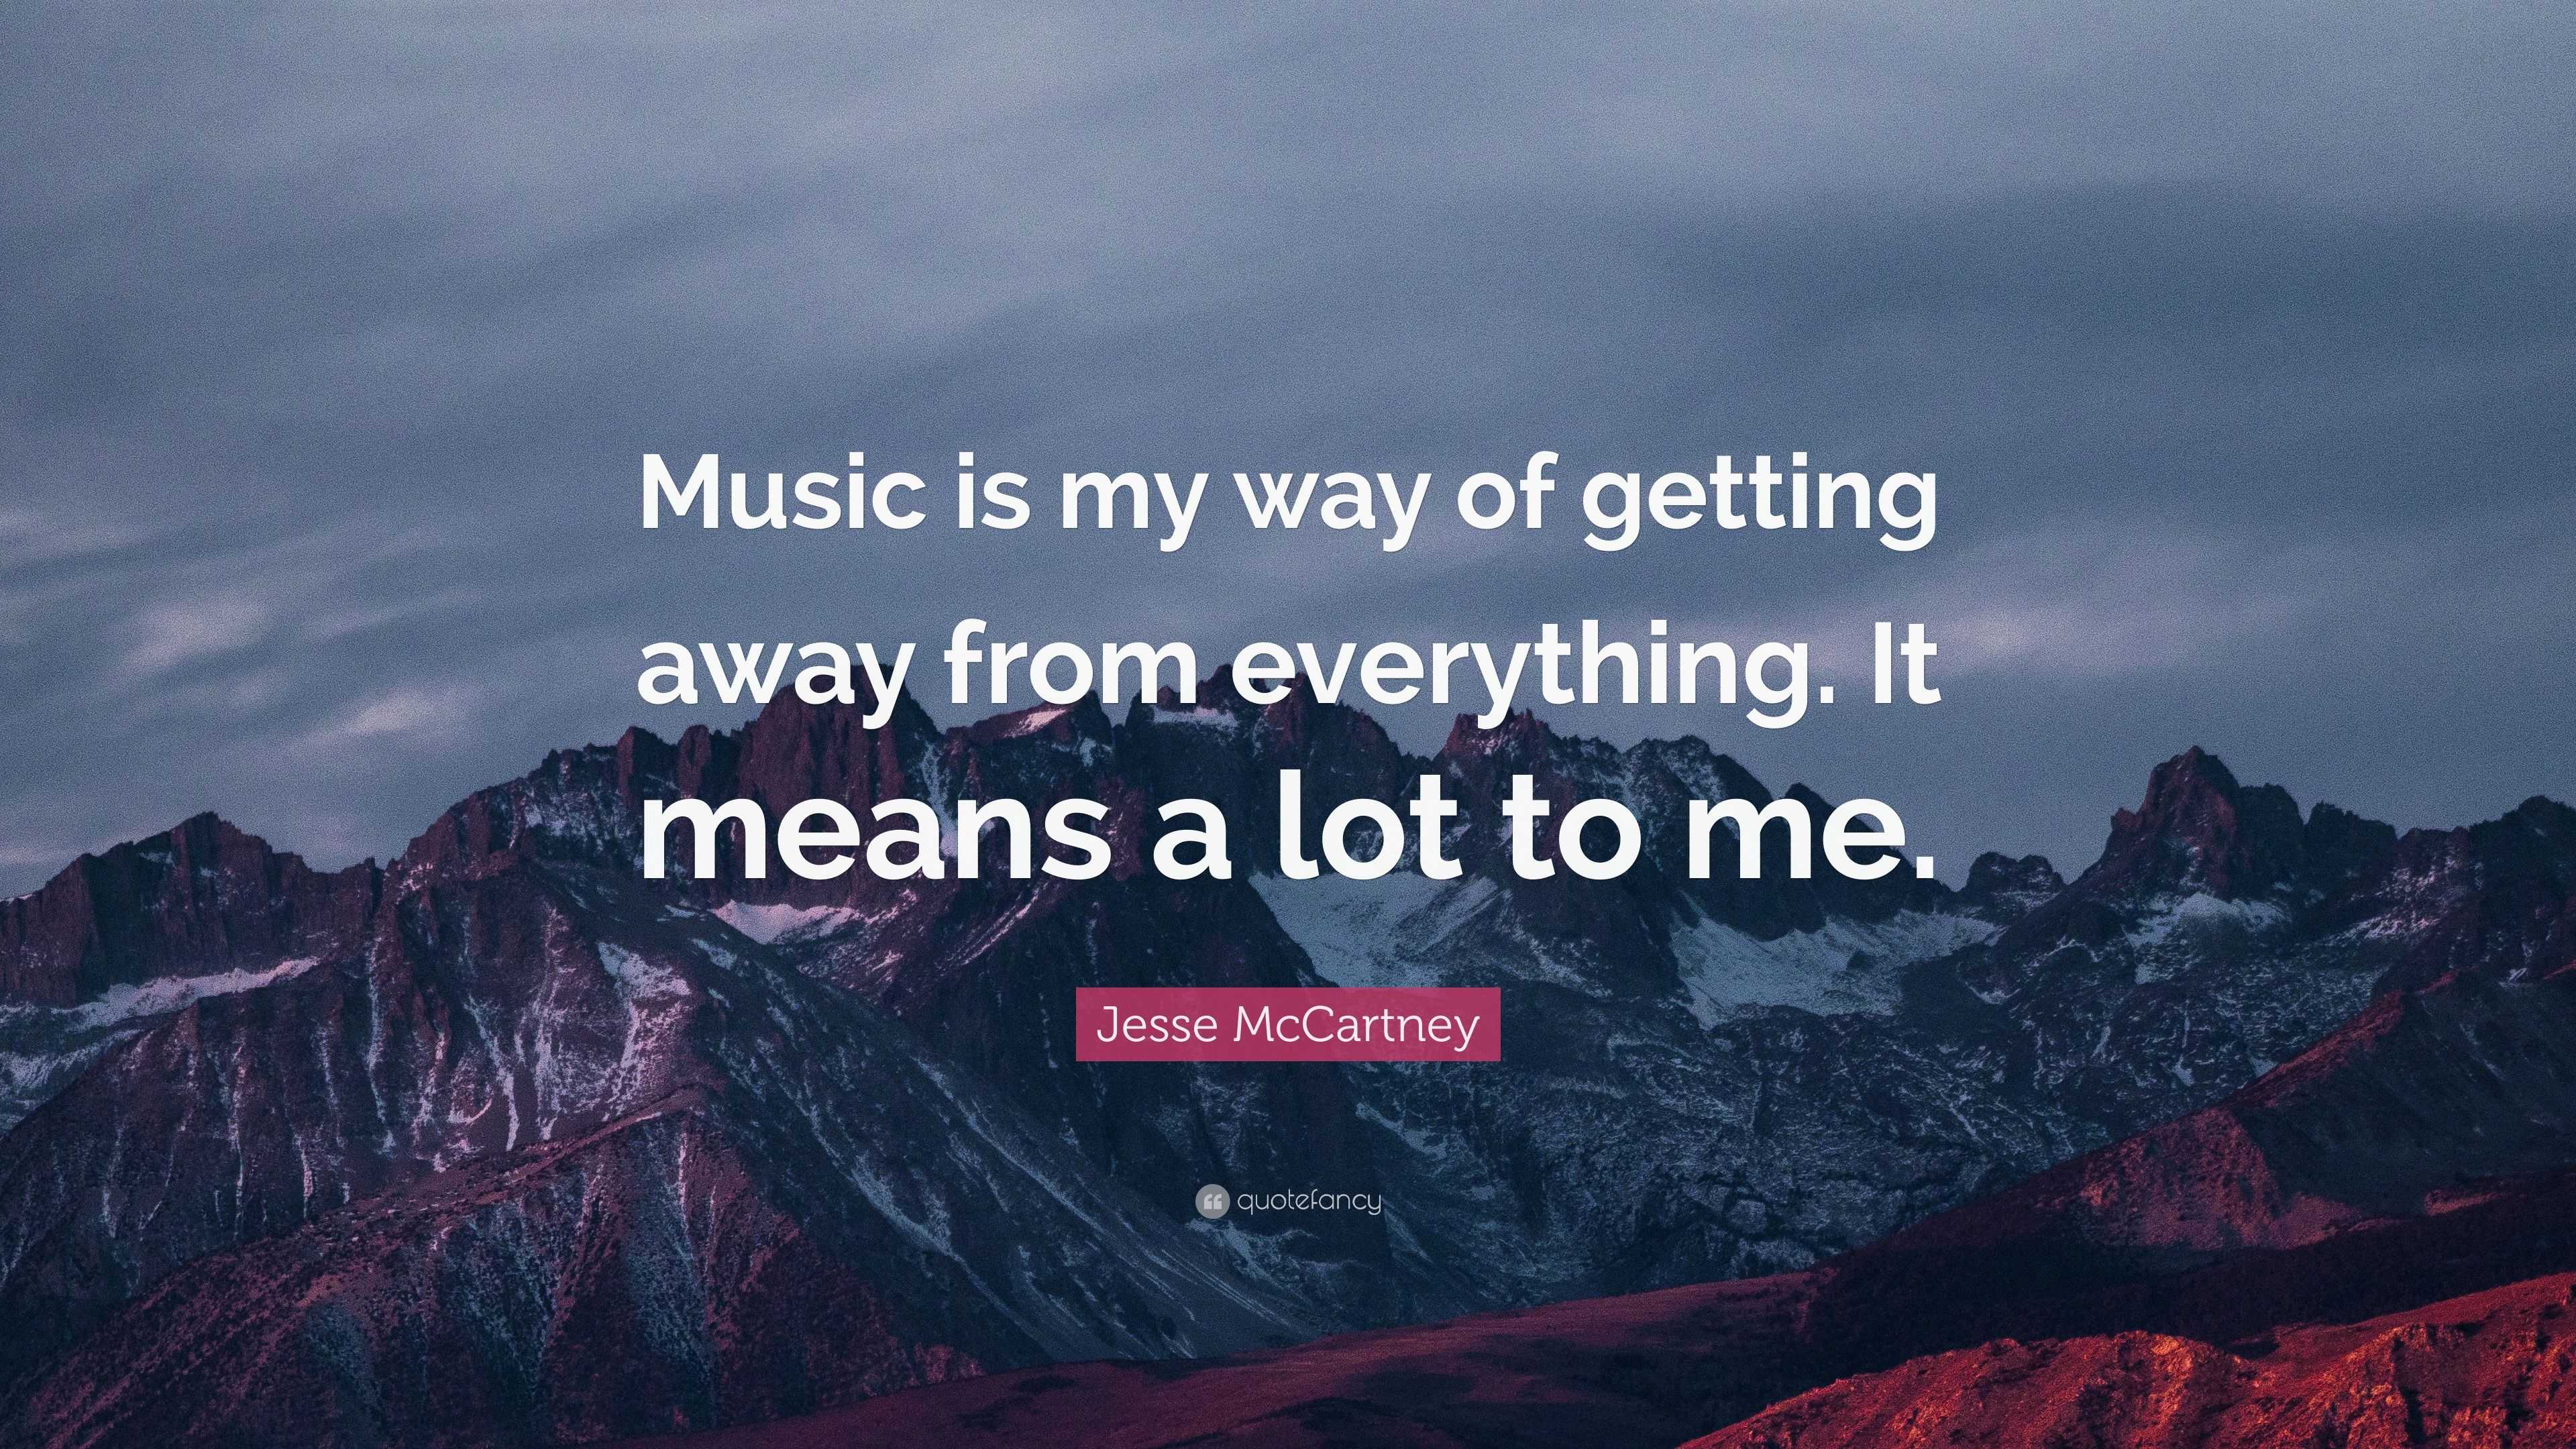 Jesse McCartney Quote: “Music is my way of getting away from everything